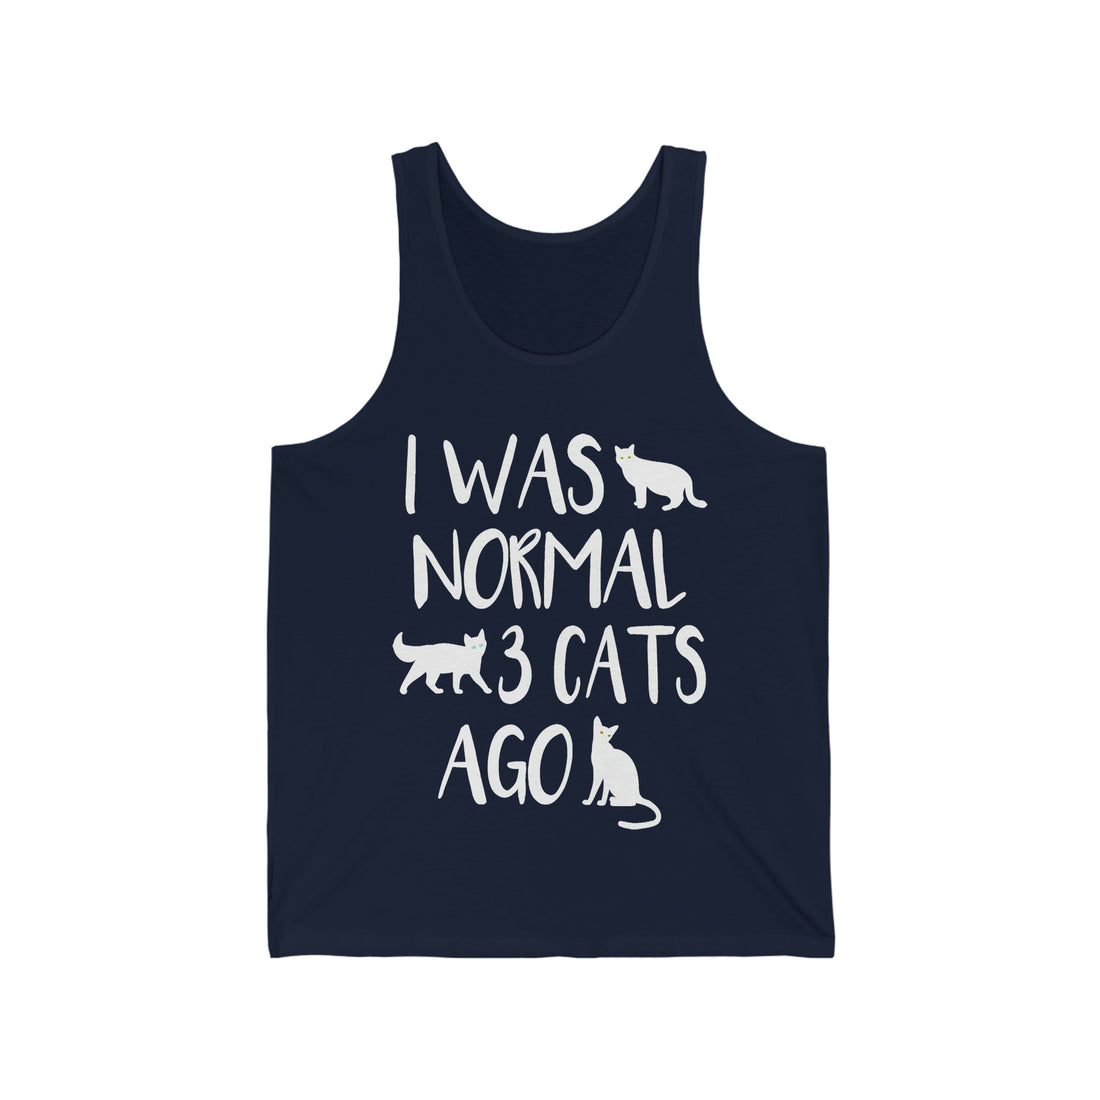 I Was Normal 3 Cats Ago - Unisex Jersey Tank Top